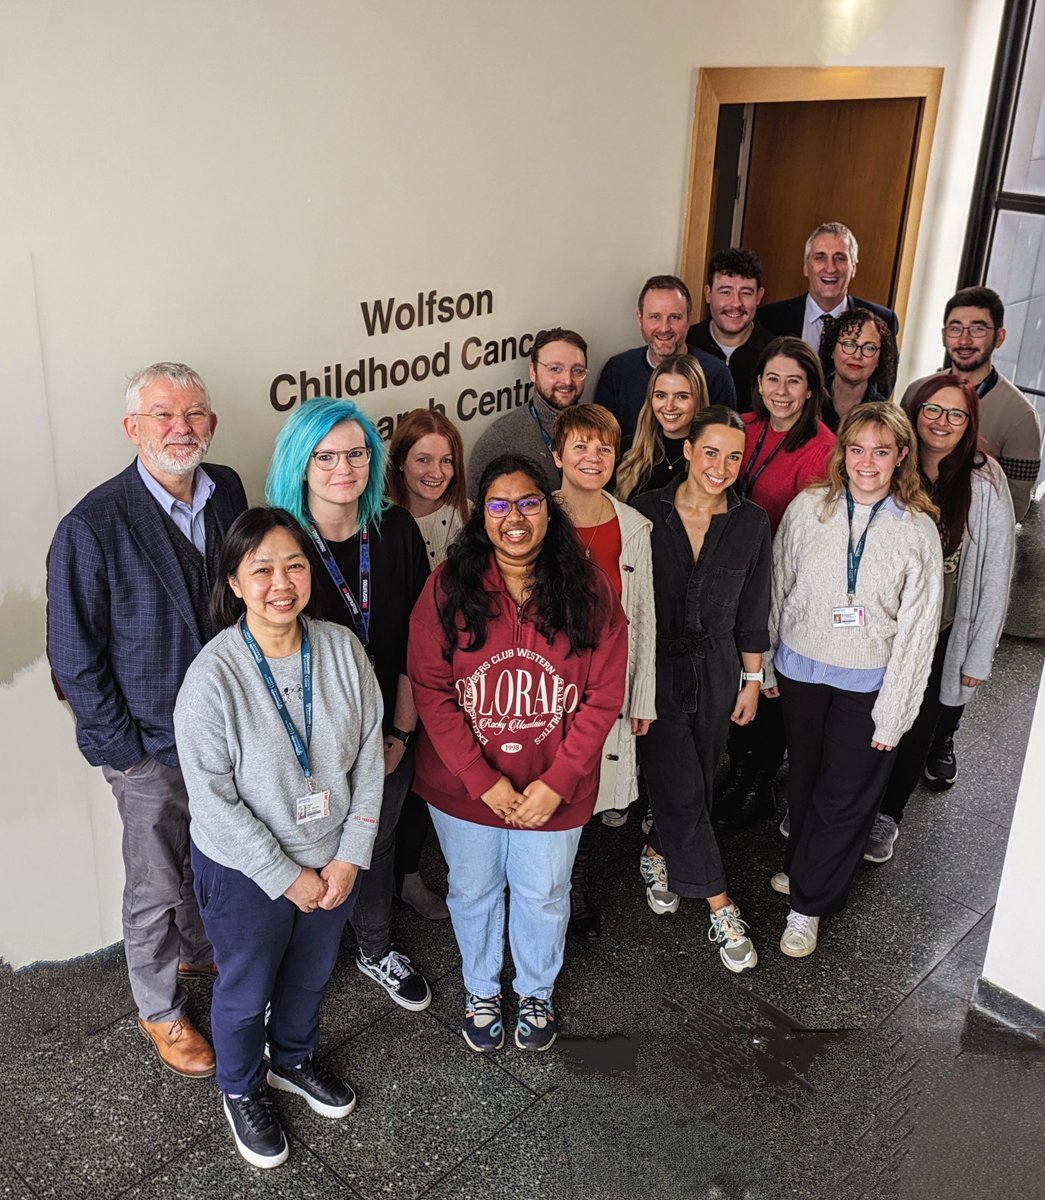 We're delighted Newcastle’s paediatric neuro-oncology services have been designated a ‘Tessa Jowell Centre of Excellence’ - one of 6 in the country to achieve this status. Read more: bit.ly/3WhzrtU @UniofNewcastle @TessaJ_Academy